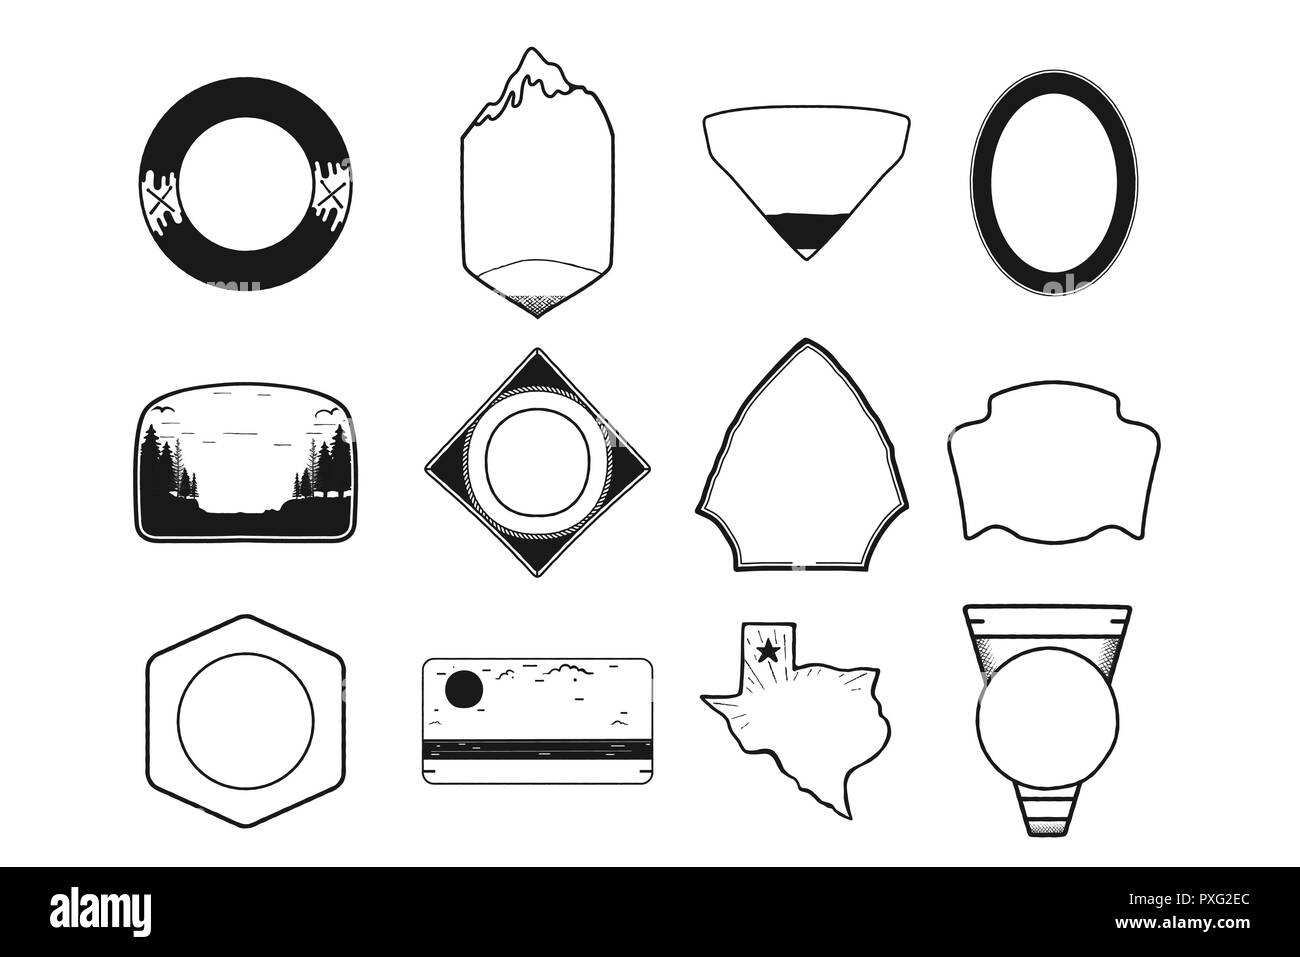 Set of black camping badge shapes. Included Texas state icon. Line art design. Stock vector Objects isolated on white background. Stock Vector